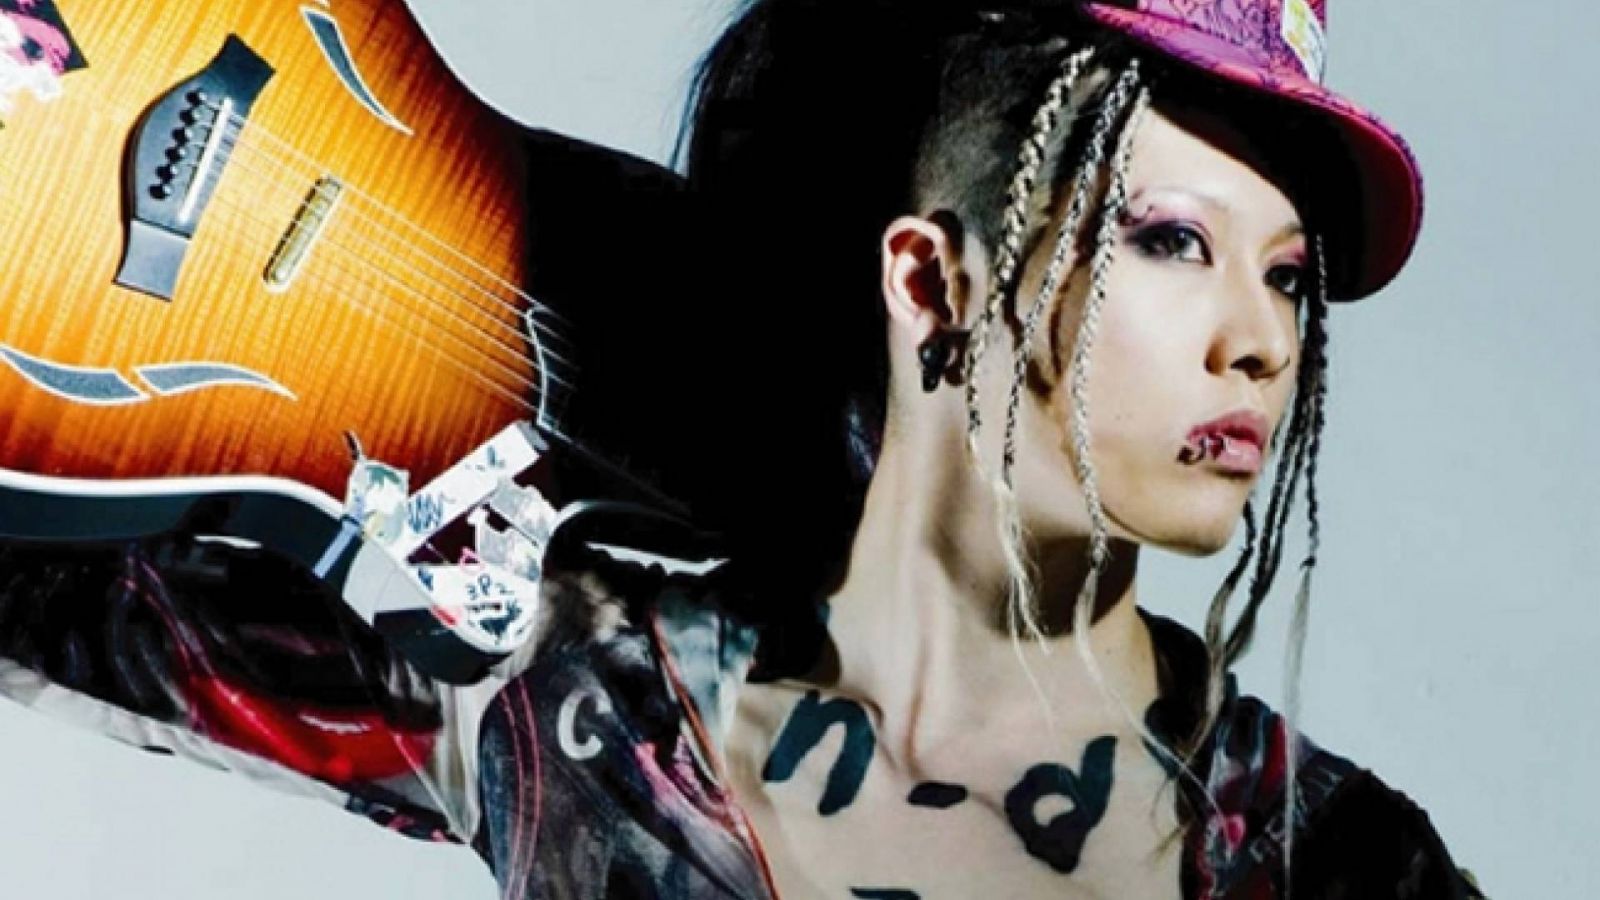 Zy 40: miyavi © 2008 Zy.connection Inc. All Rights Reserved.